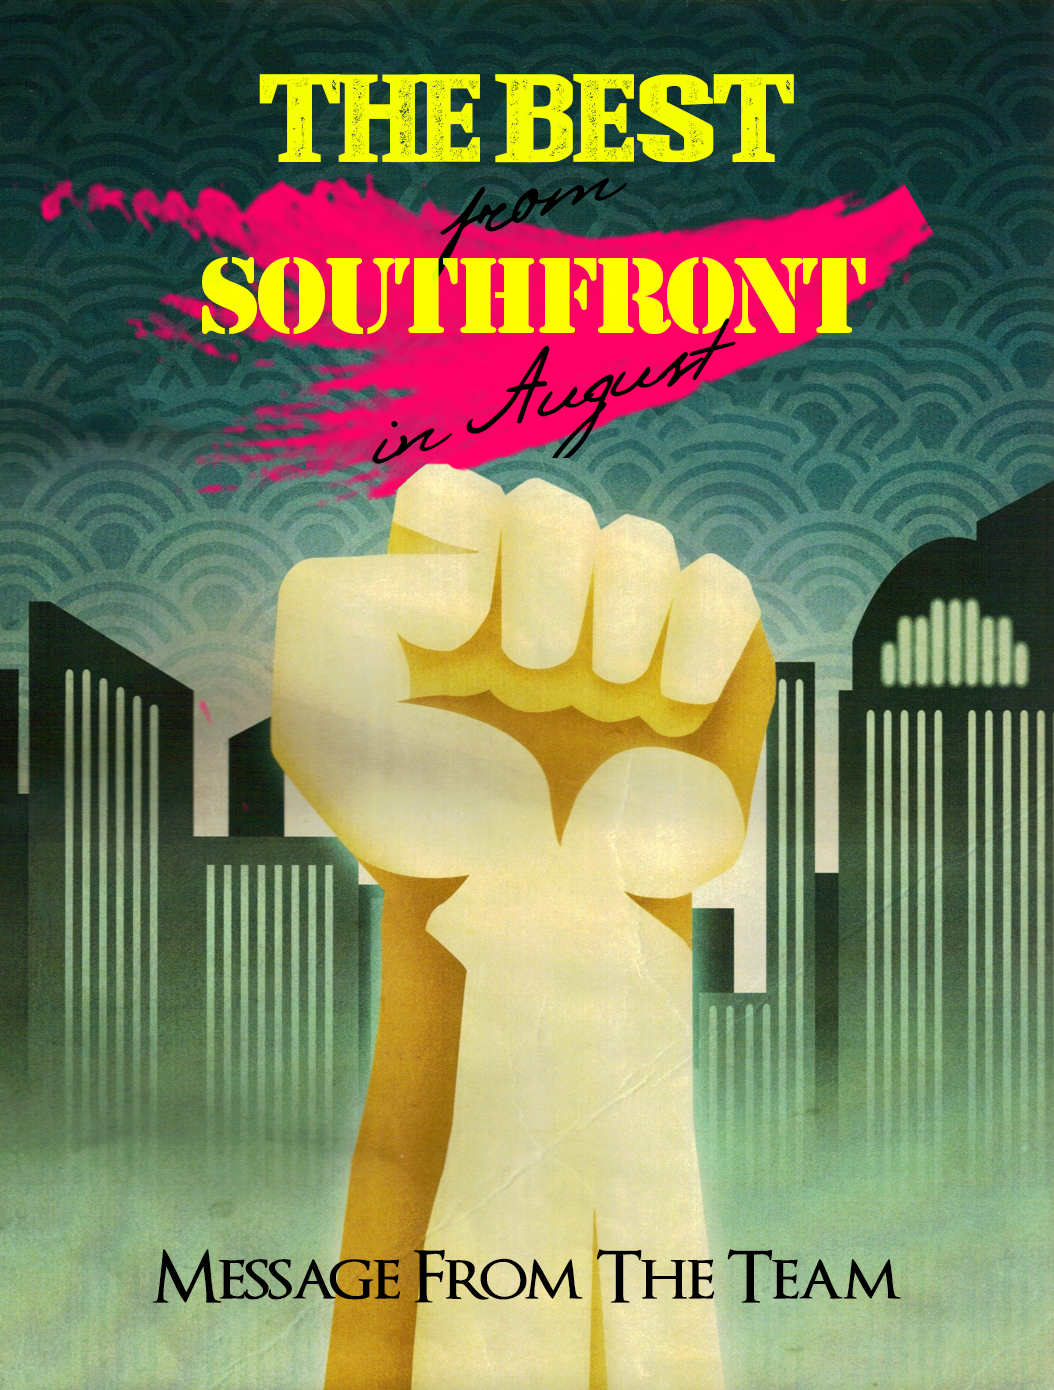 The best from SouthFront in August, Message from the Team